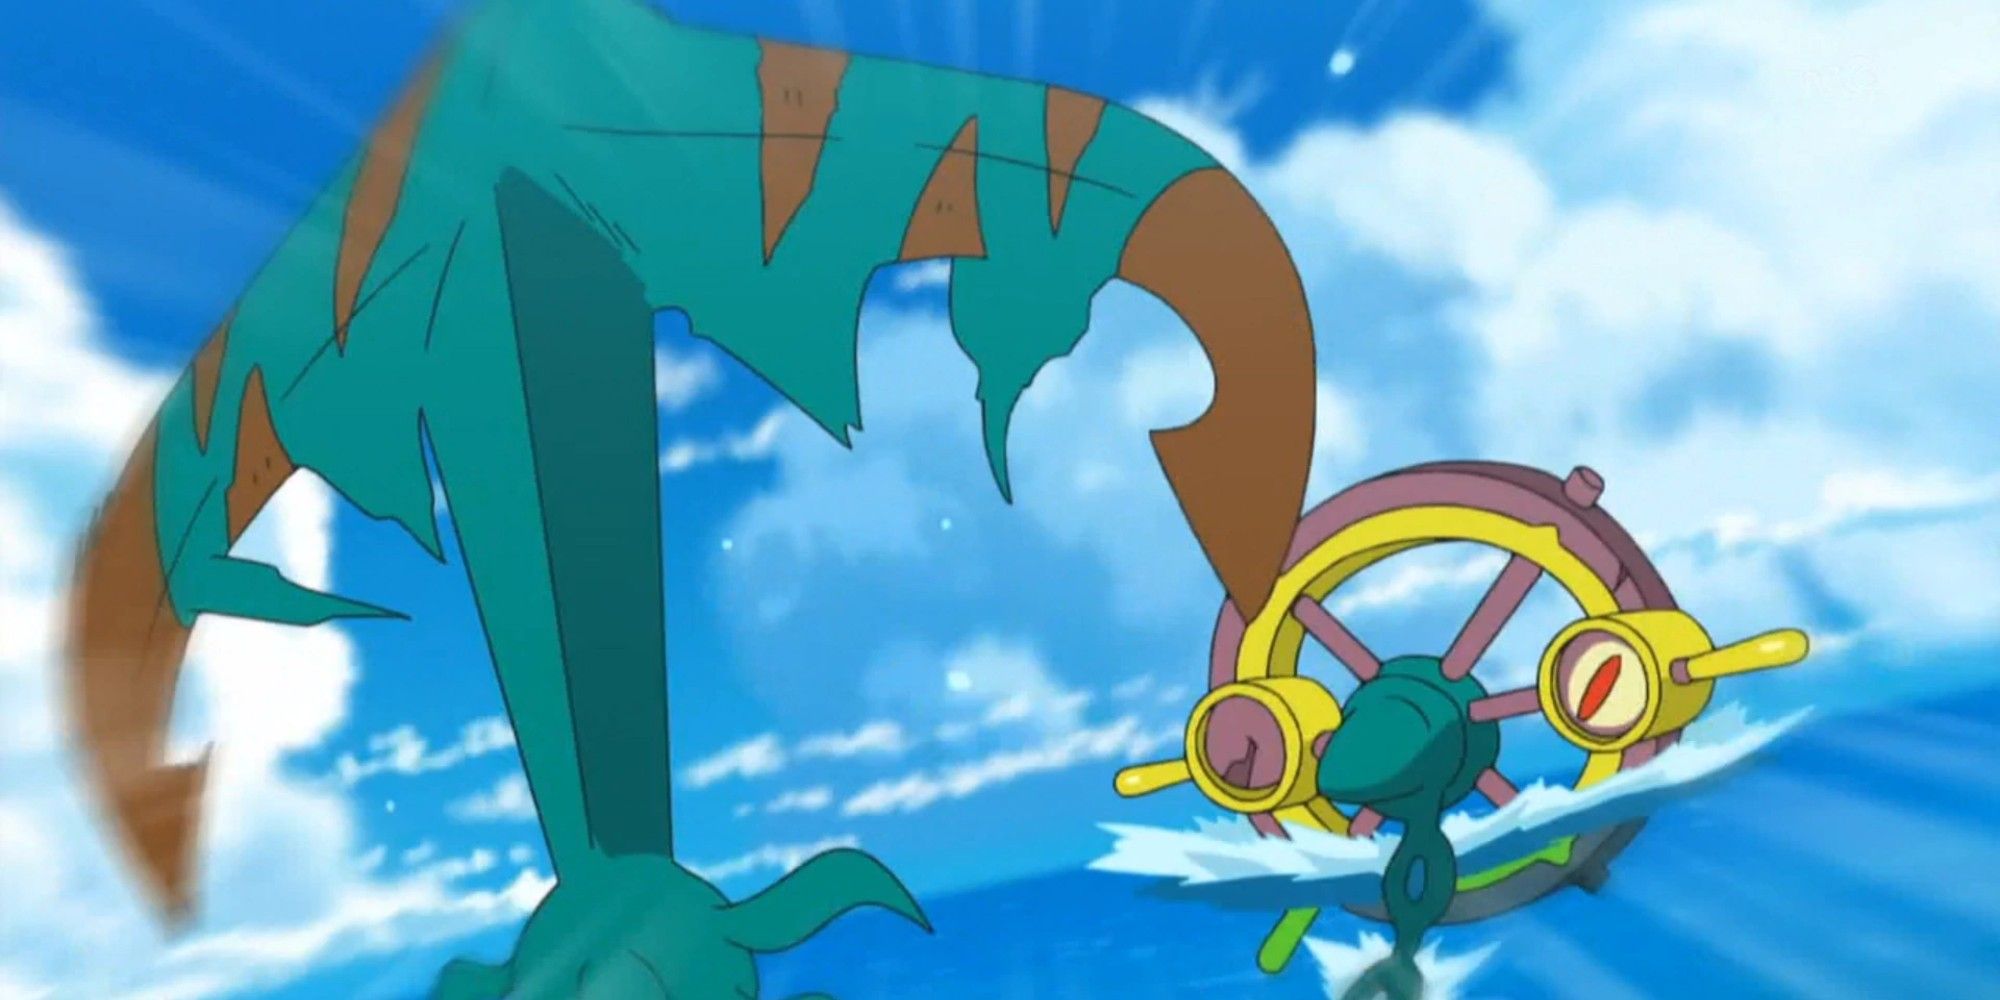 Dhelmise Anchor Shot in the sea from the anime